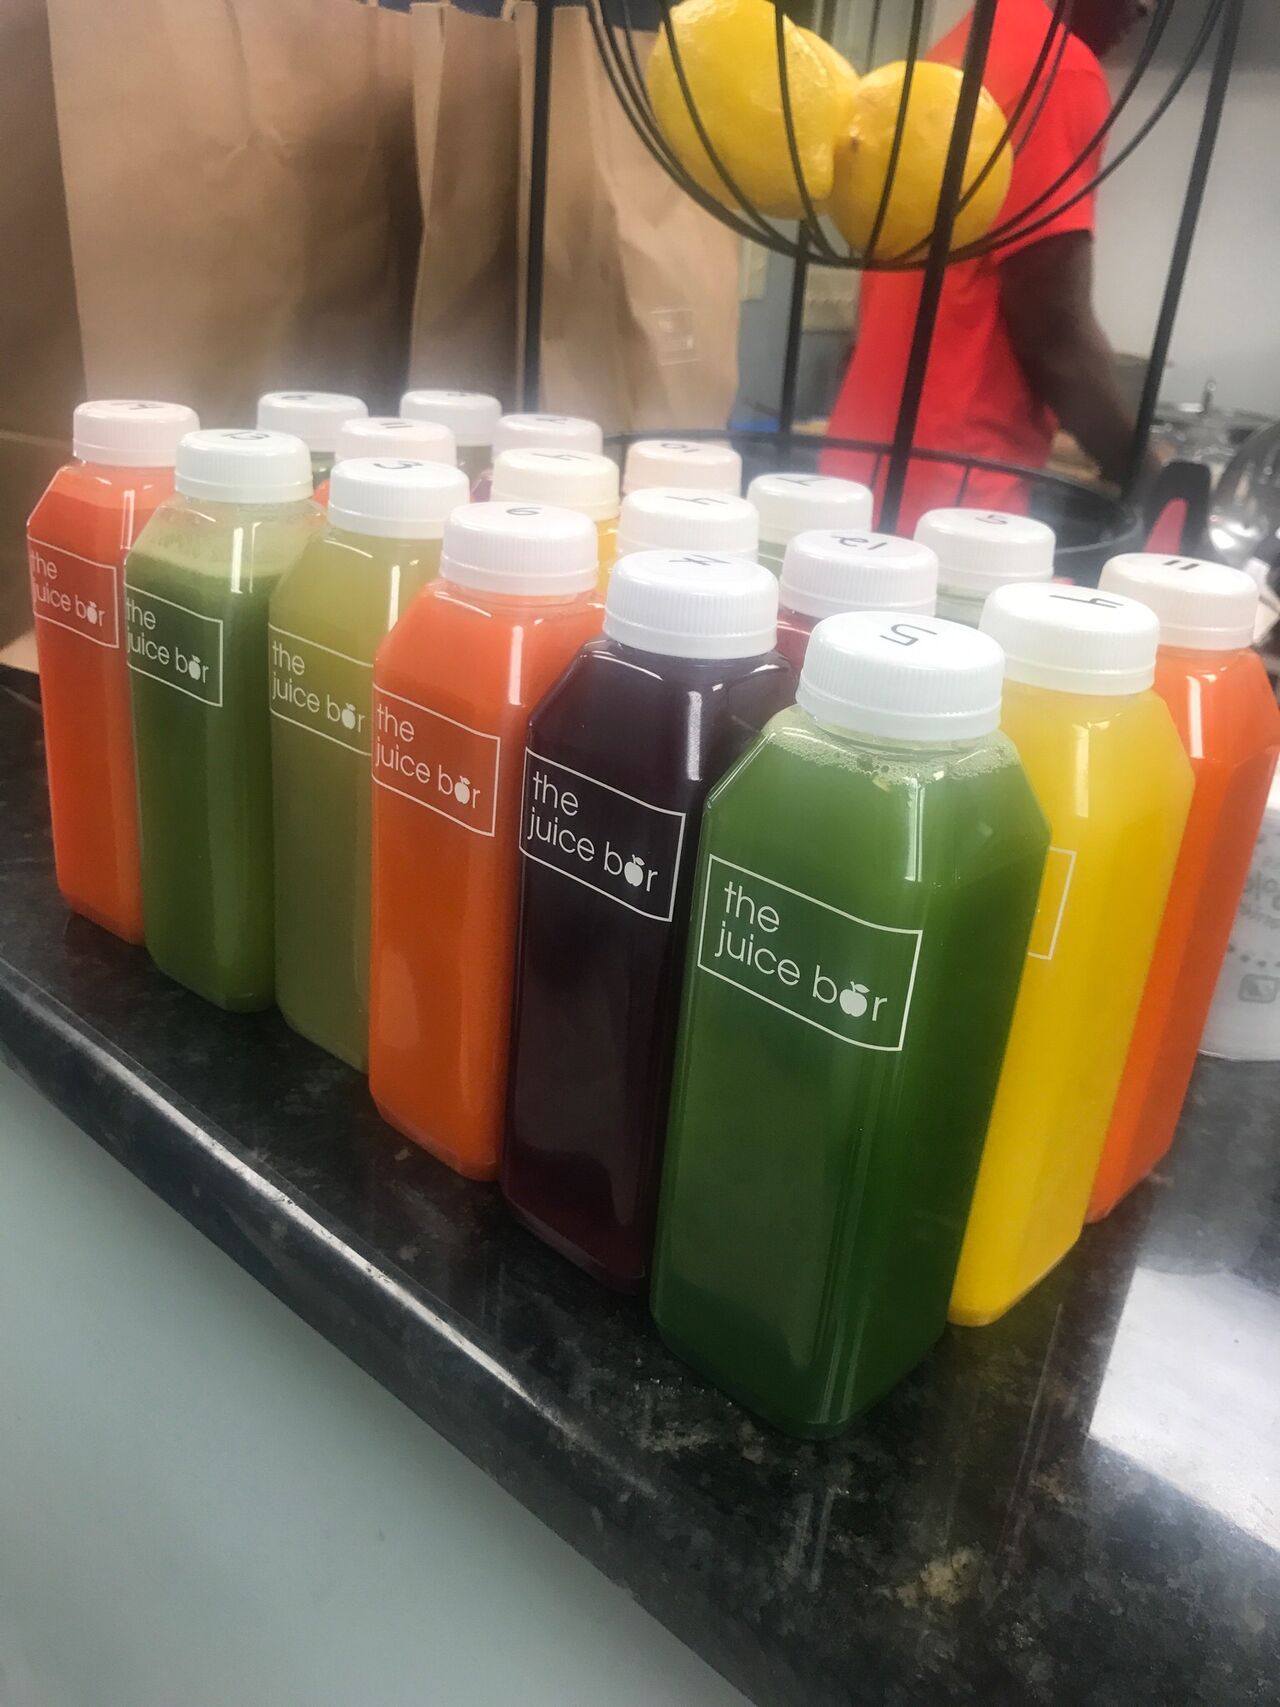 A photo of The Juice Bar